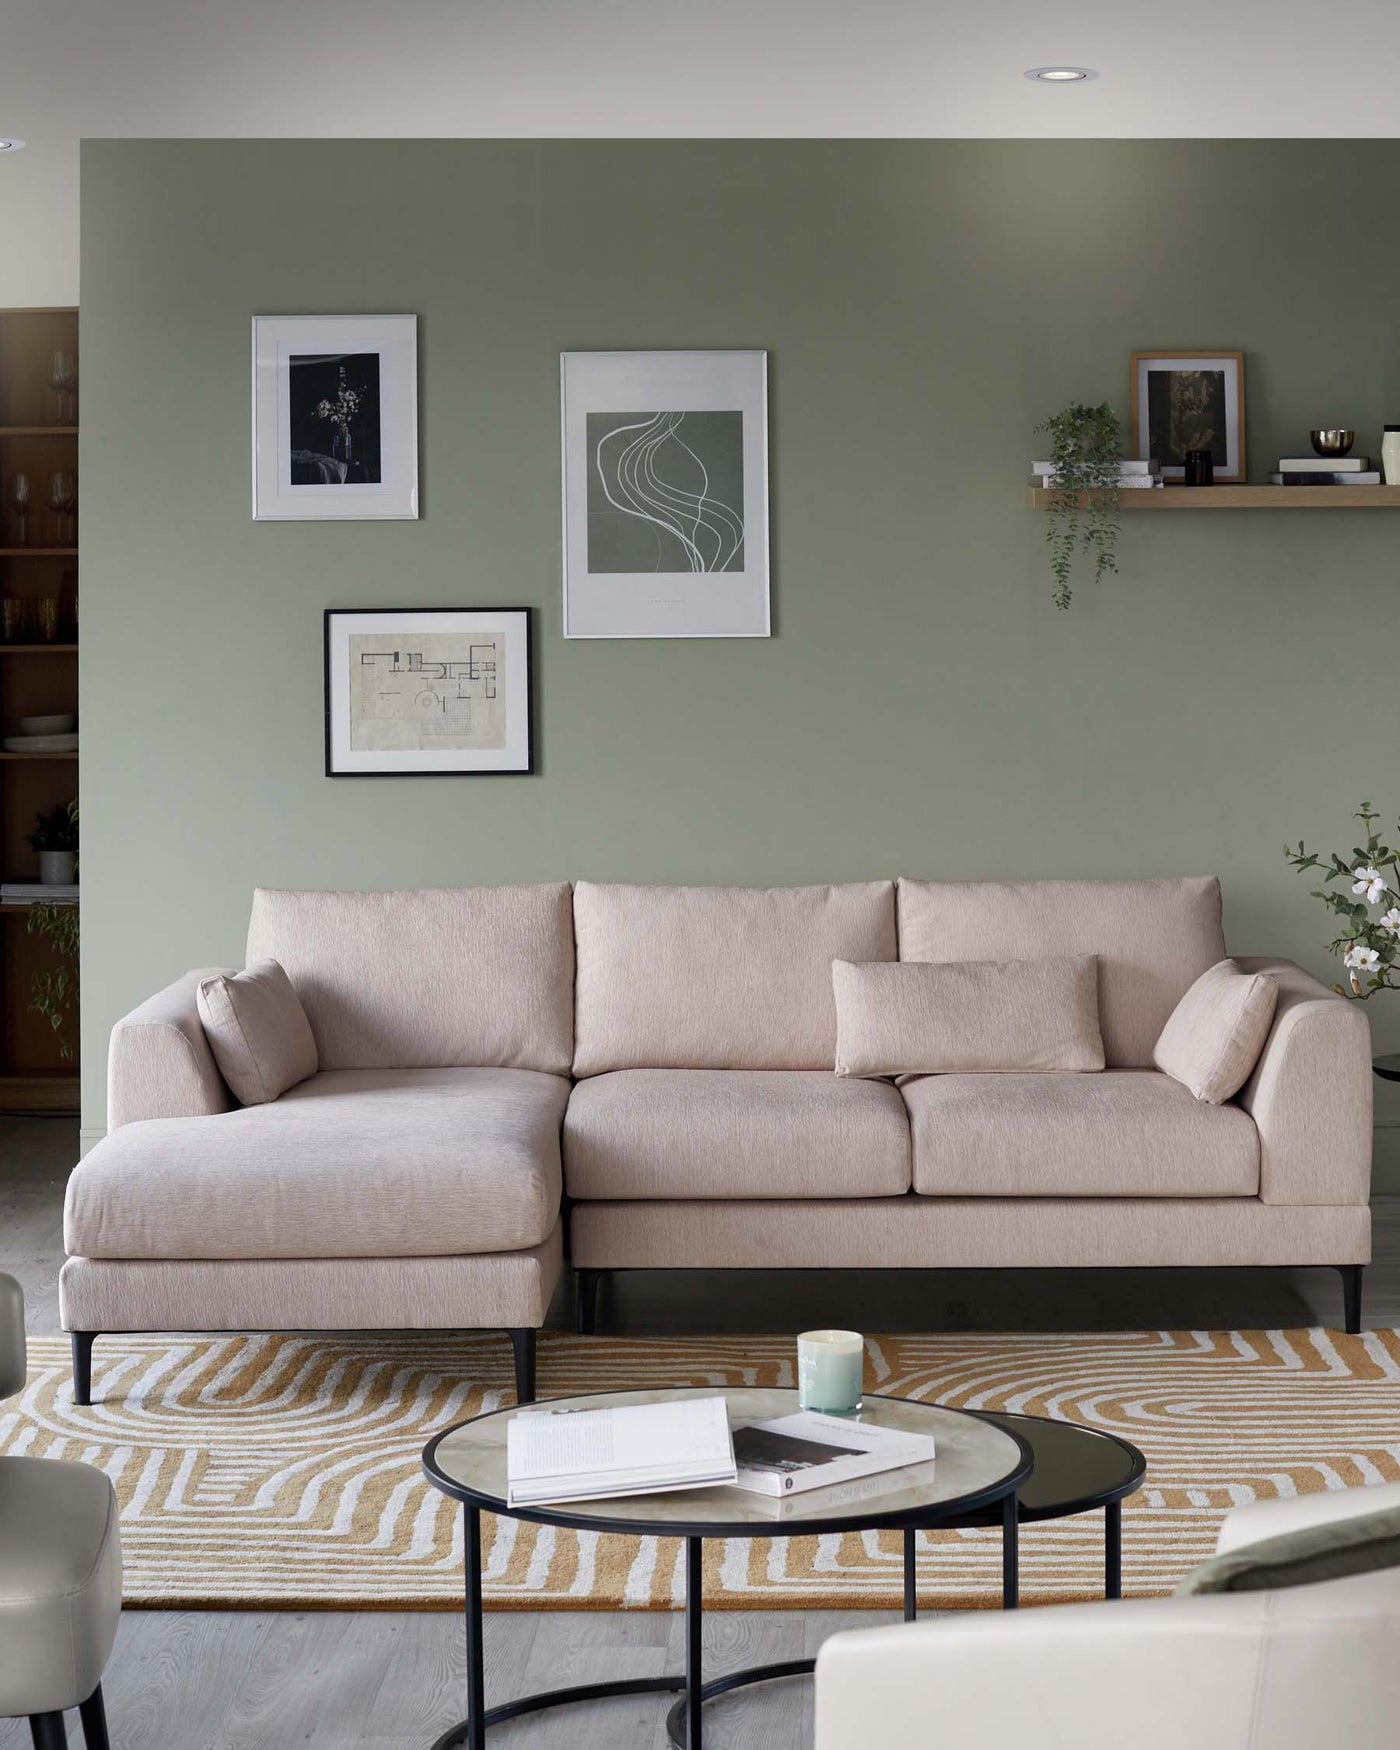 Elegant beige fabric L-shaped sectional sofa with plush cushions and a simple, modern design. In front of the sofa is a round, black metal coffee table with a glass top, hosting books and a candle. The furniture is complemented by a patterned off-white and beige area rug beneath.